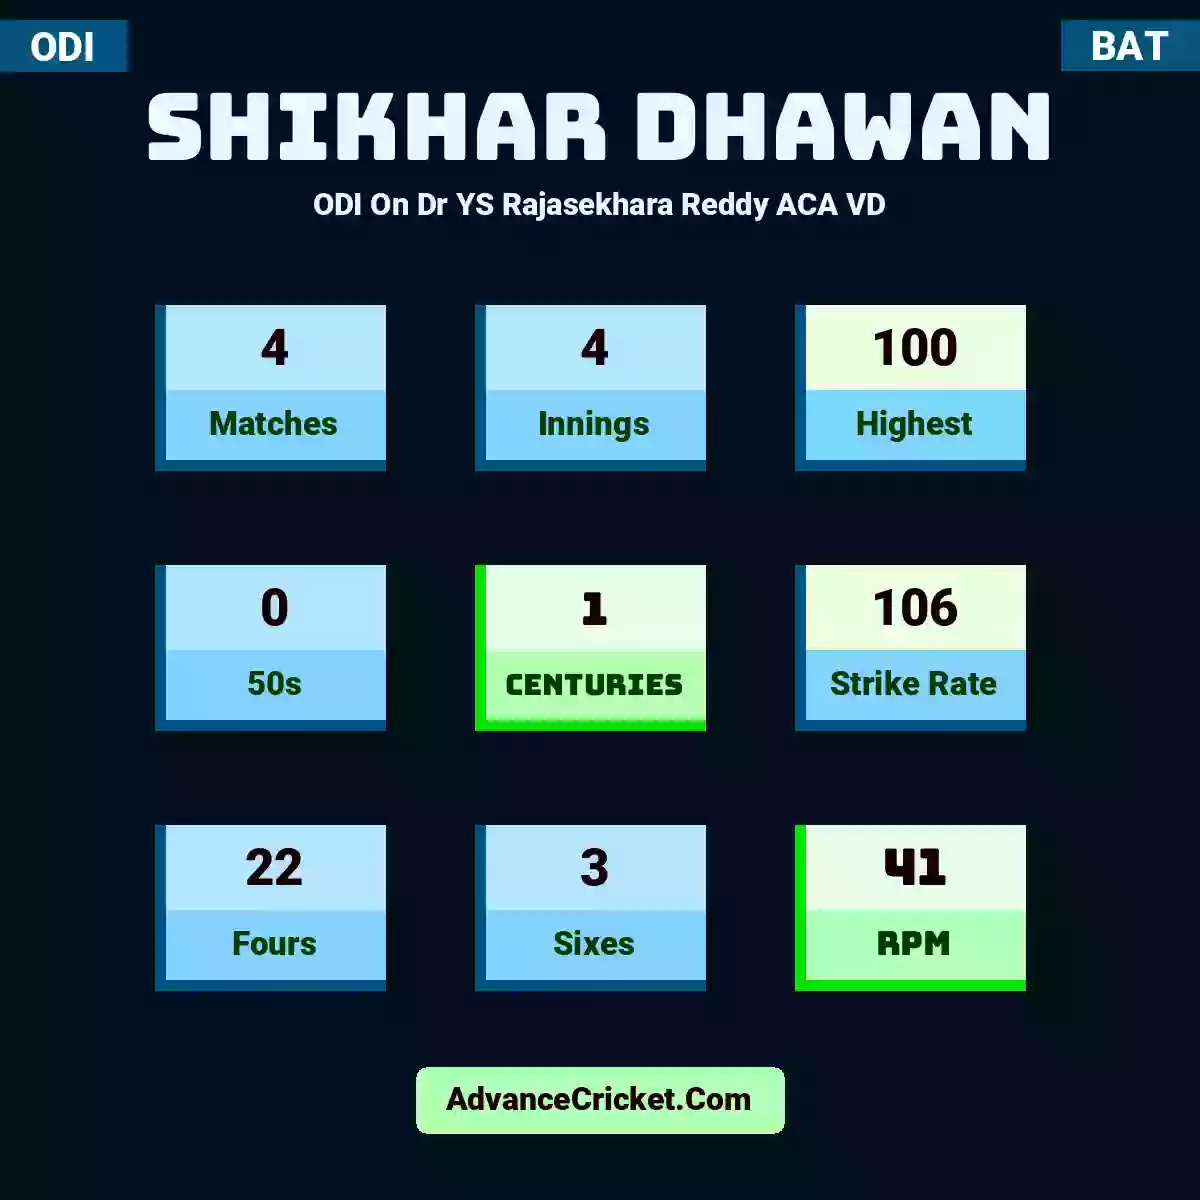 Shikhar Dhawan ODI  On Dr YS Rajasekhara Reddy ACA VD, Shikhar Dhawan played 4 matches, scored 100 runs as highest, 0 half-centuries, and 1 centuries, with a strike rate of 106. S.Dhawan hit 22 fours and 3 sixes, with an RPM of 41.